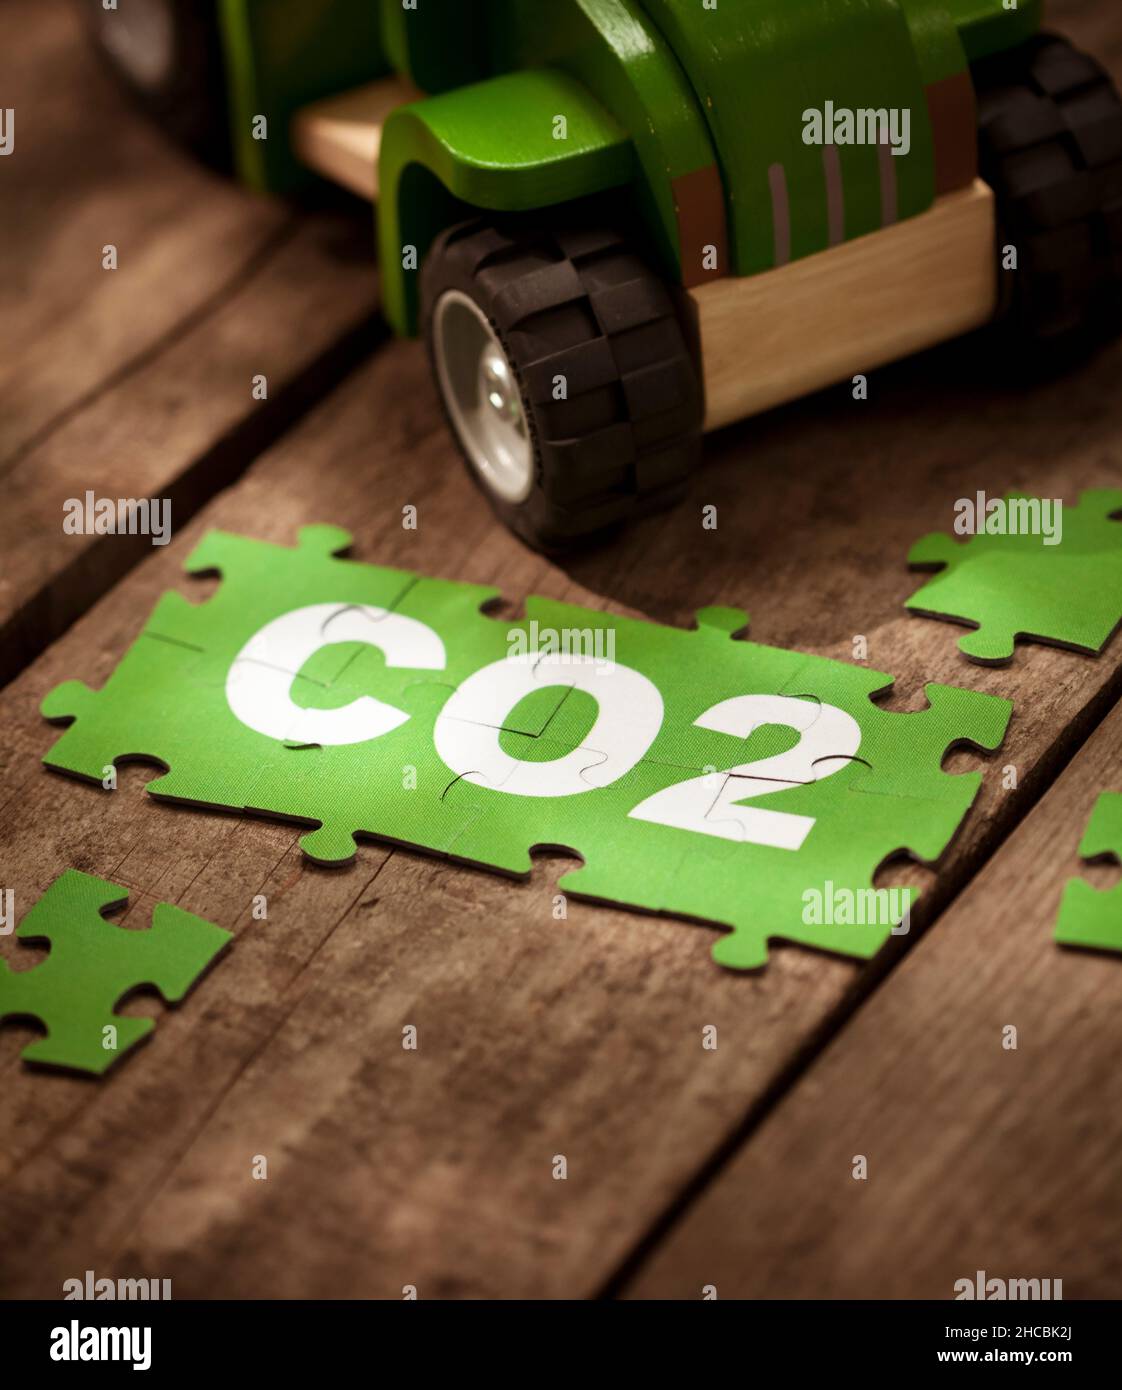 CO2 jigsaw puzzle pieces by toy car on table Stock Photo